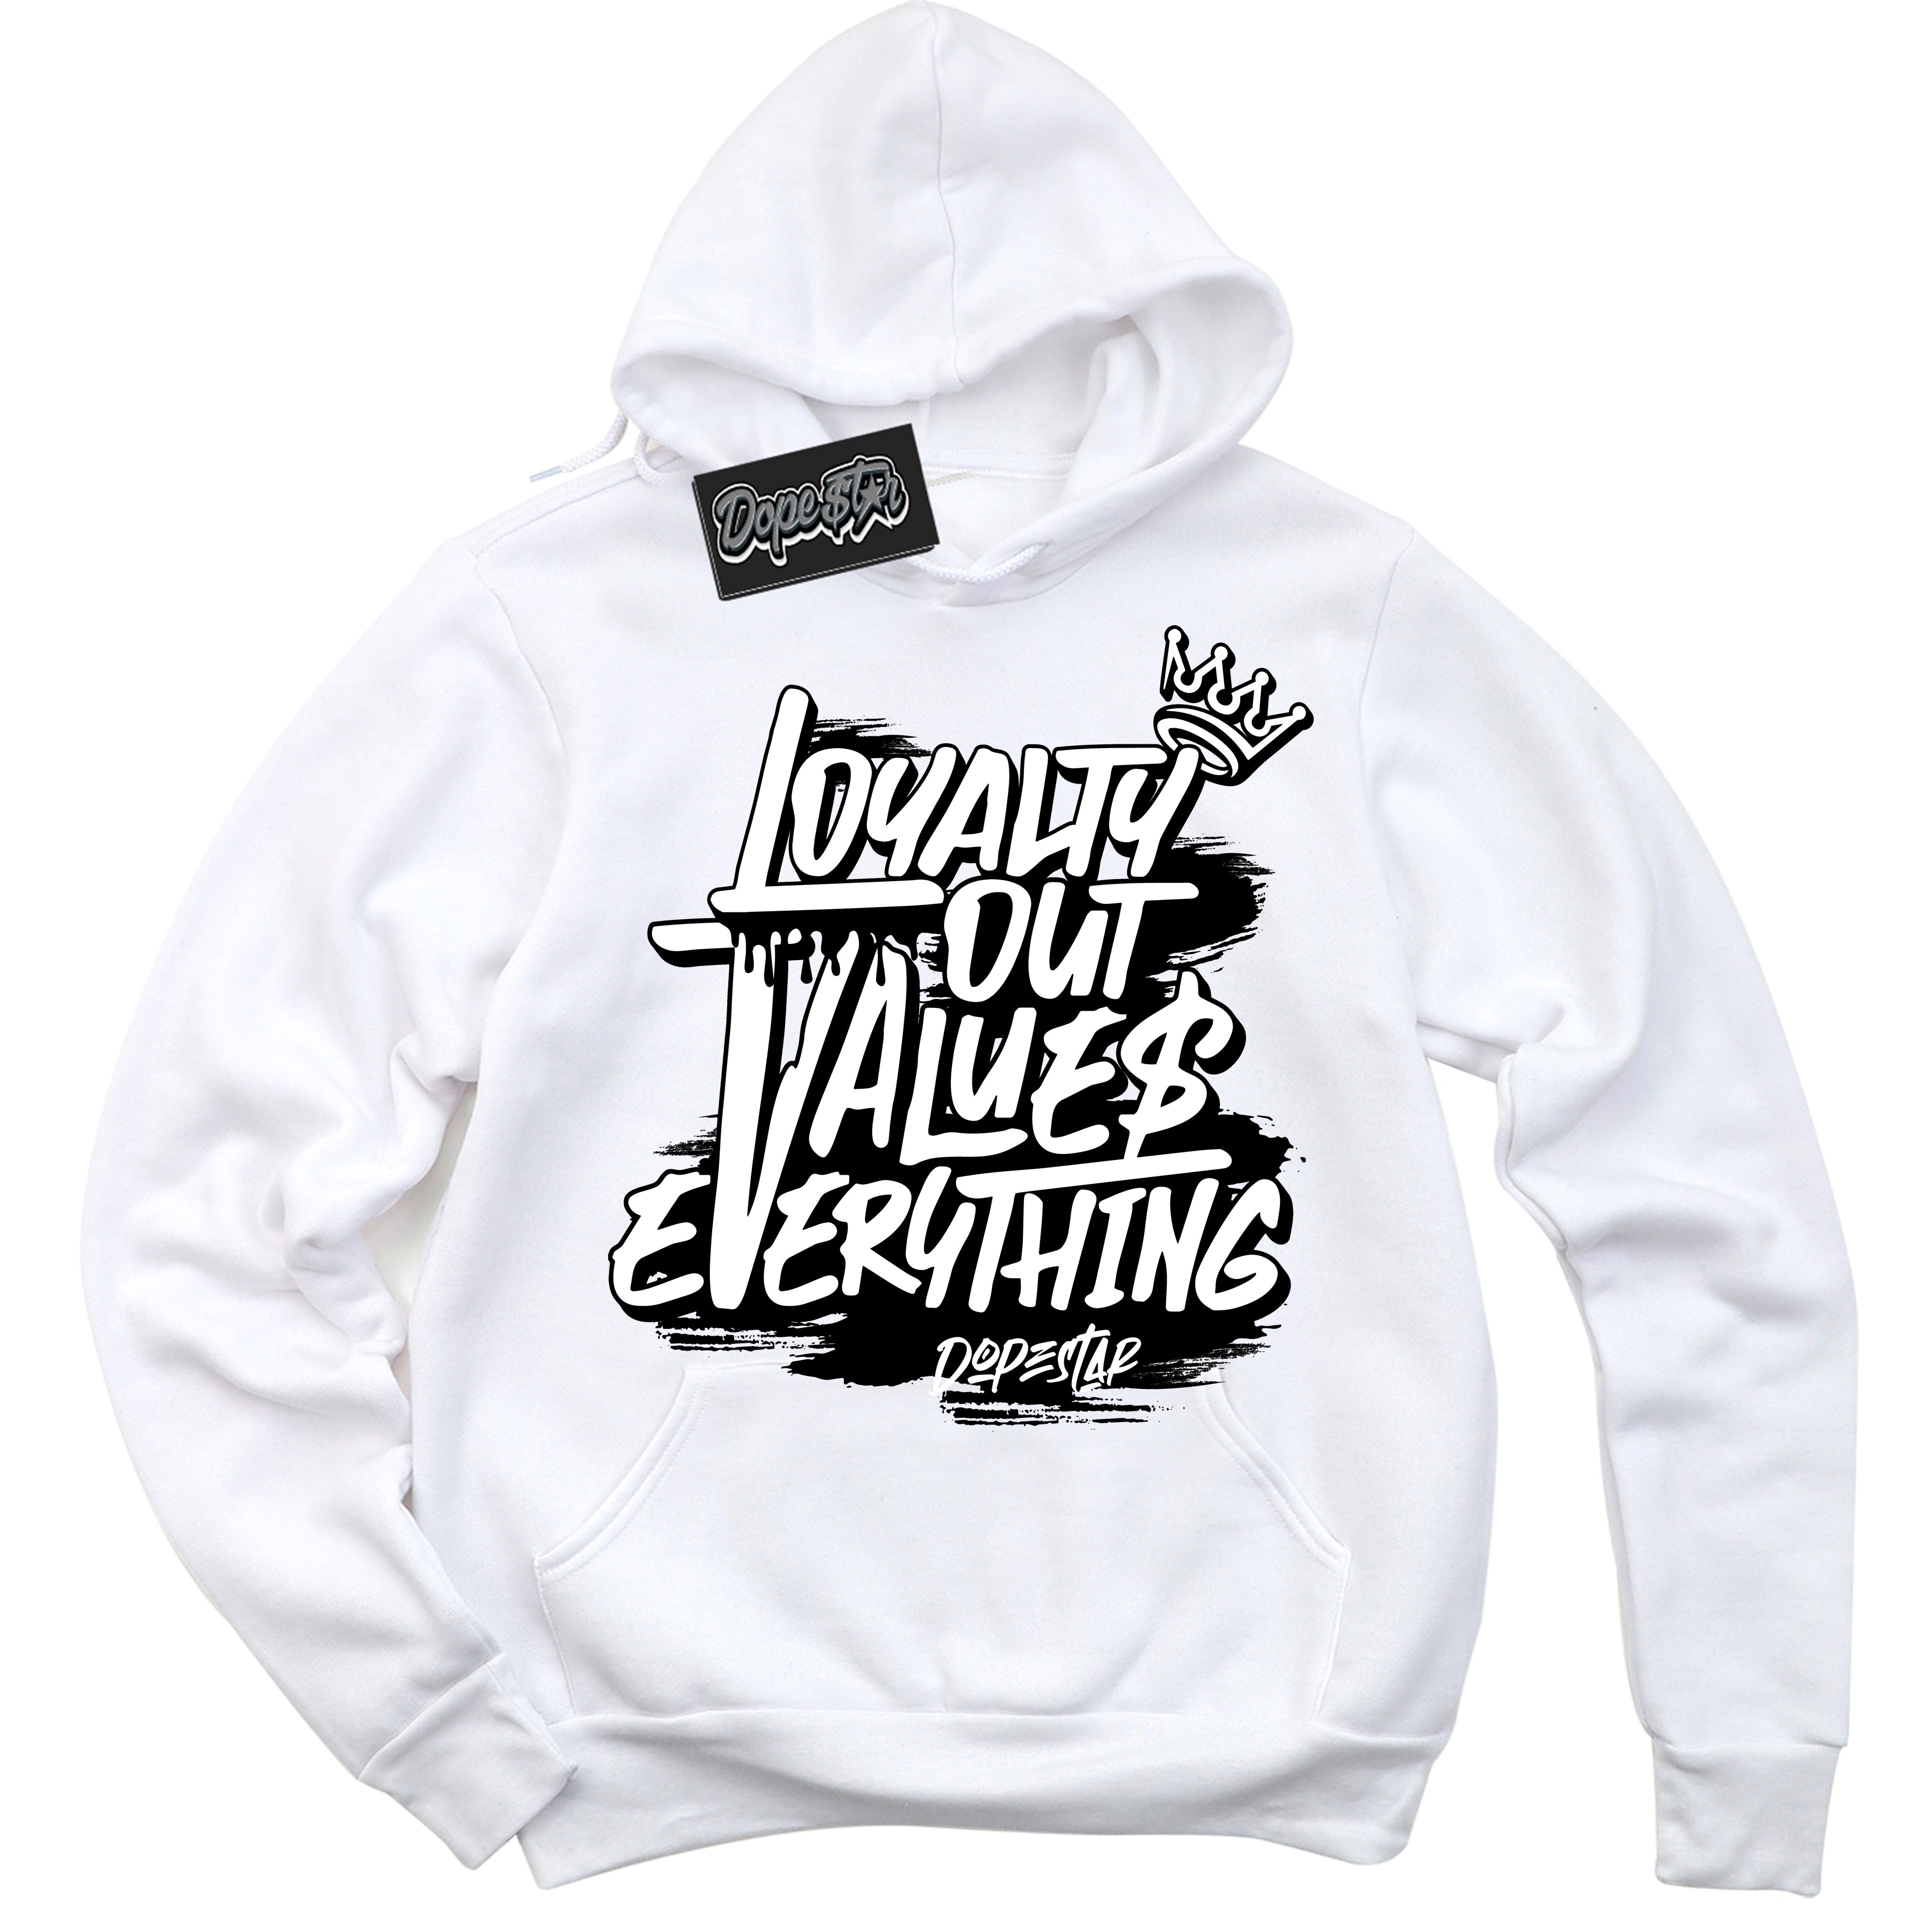 Cool White Hoodie with “ Loyalty Out Values Everything ”  design that Perfectly Matches Black White 14s Sneakers.